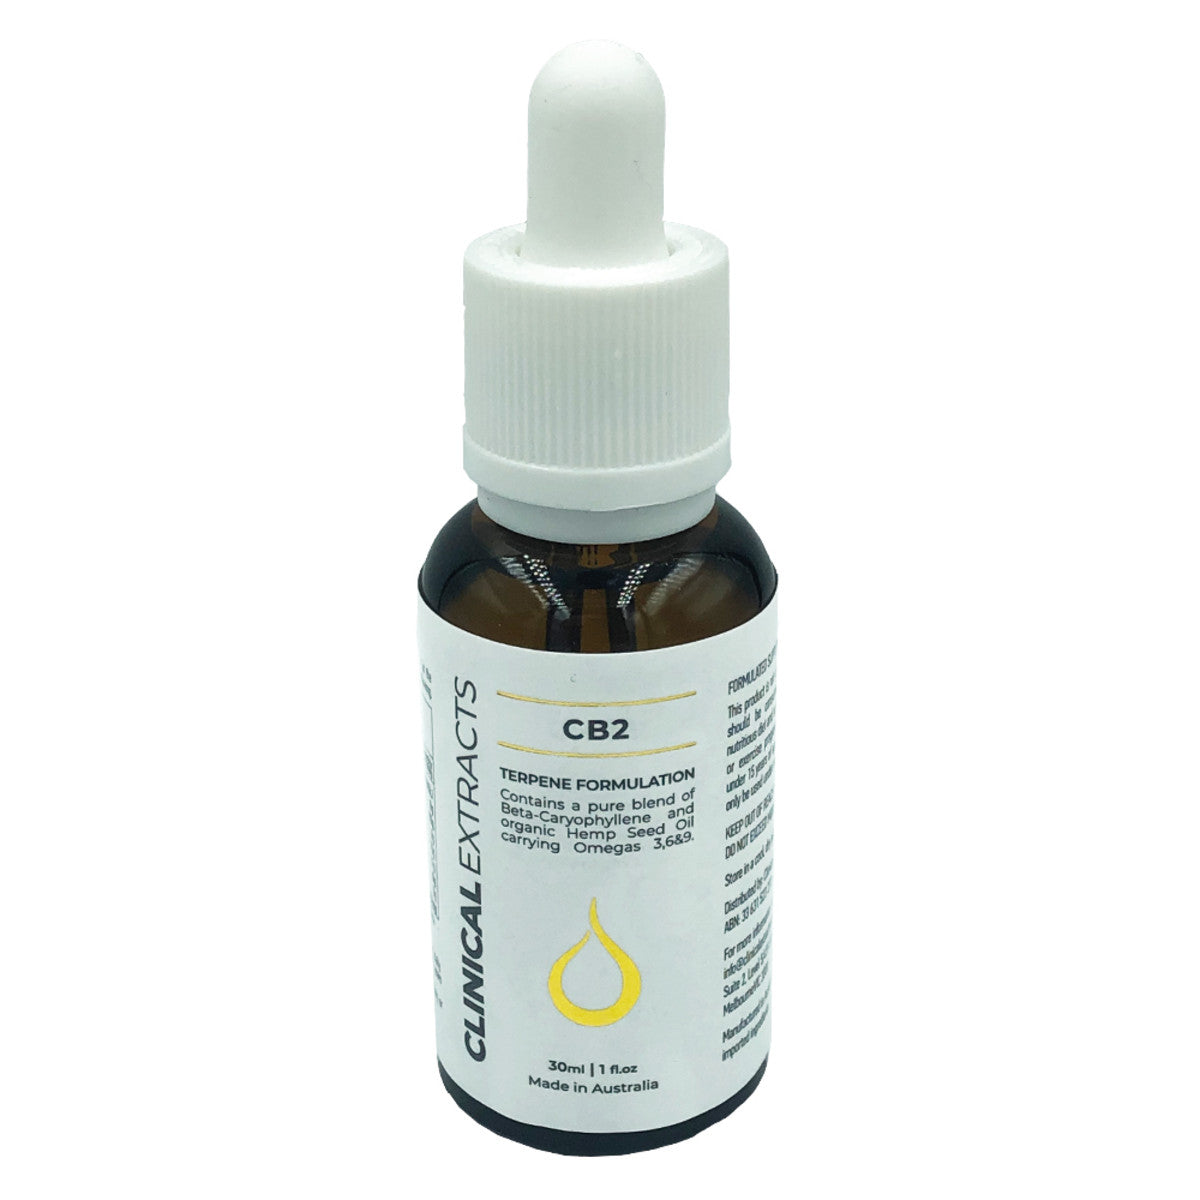 Clinical Extracts - Terpene Formulation CB2